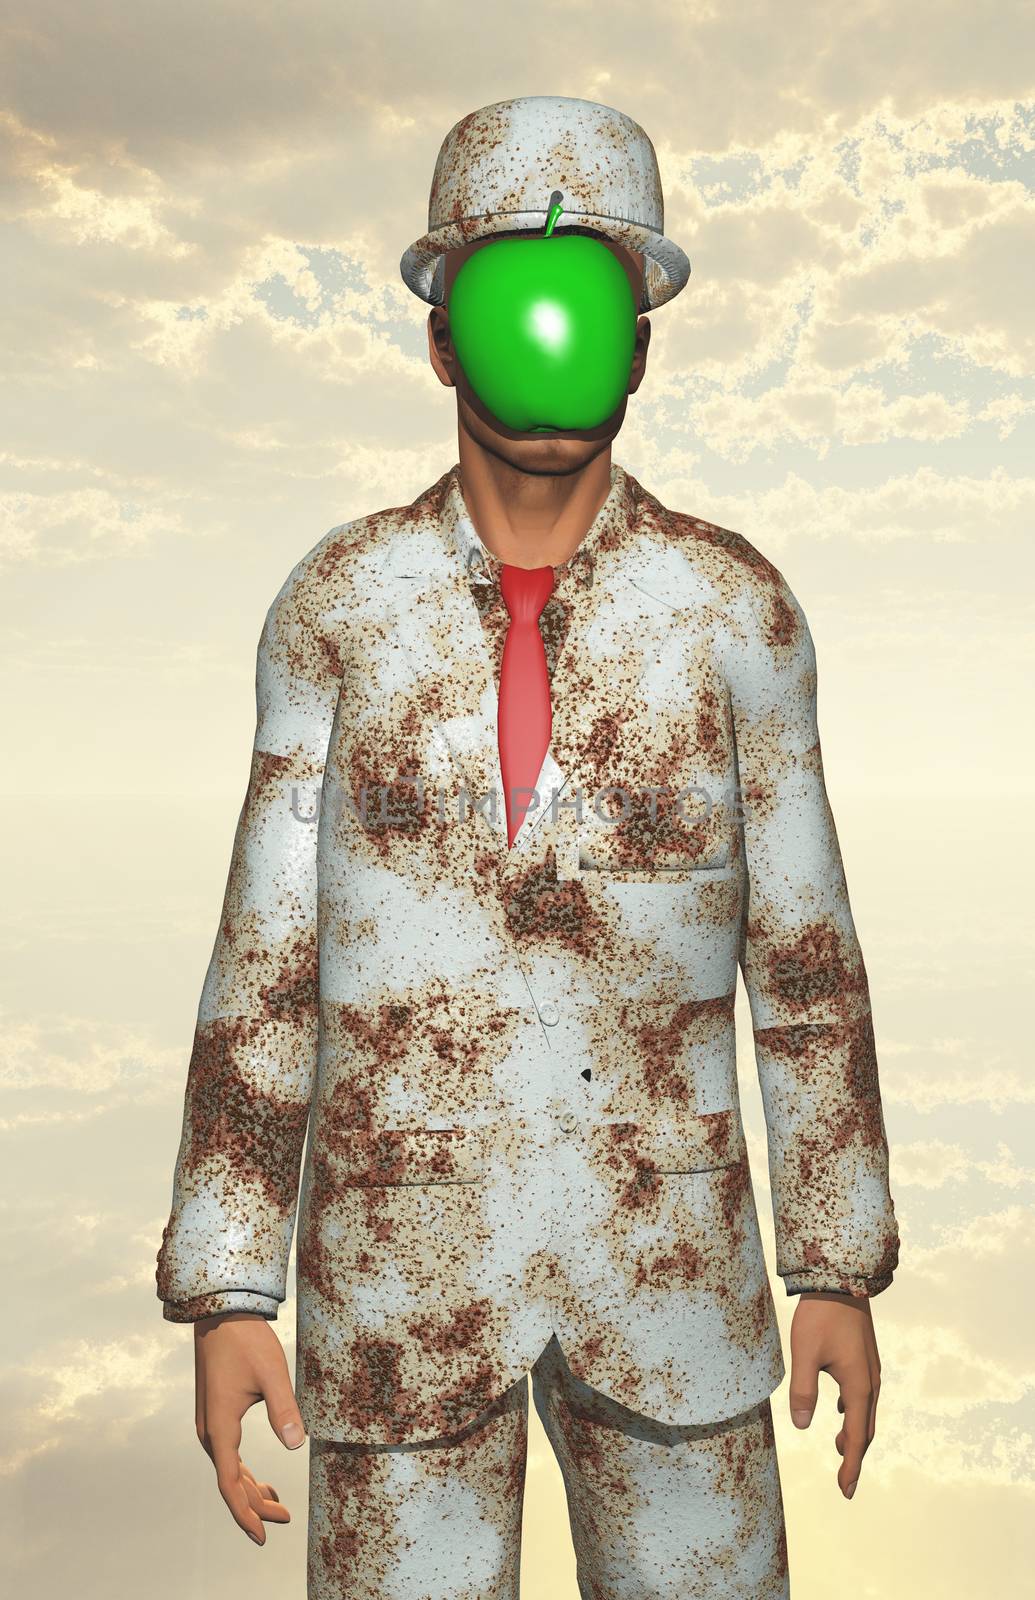 Man in white corroded suit with obscured face